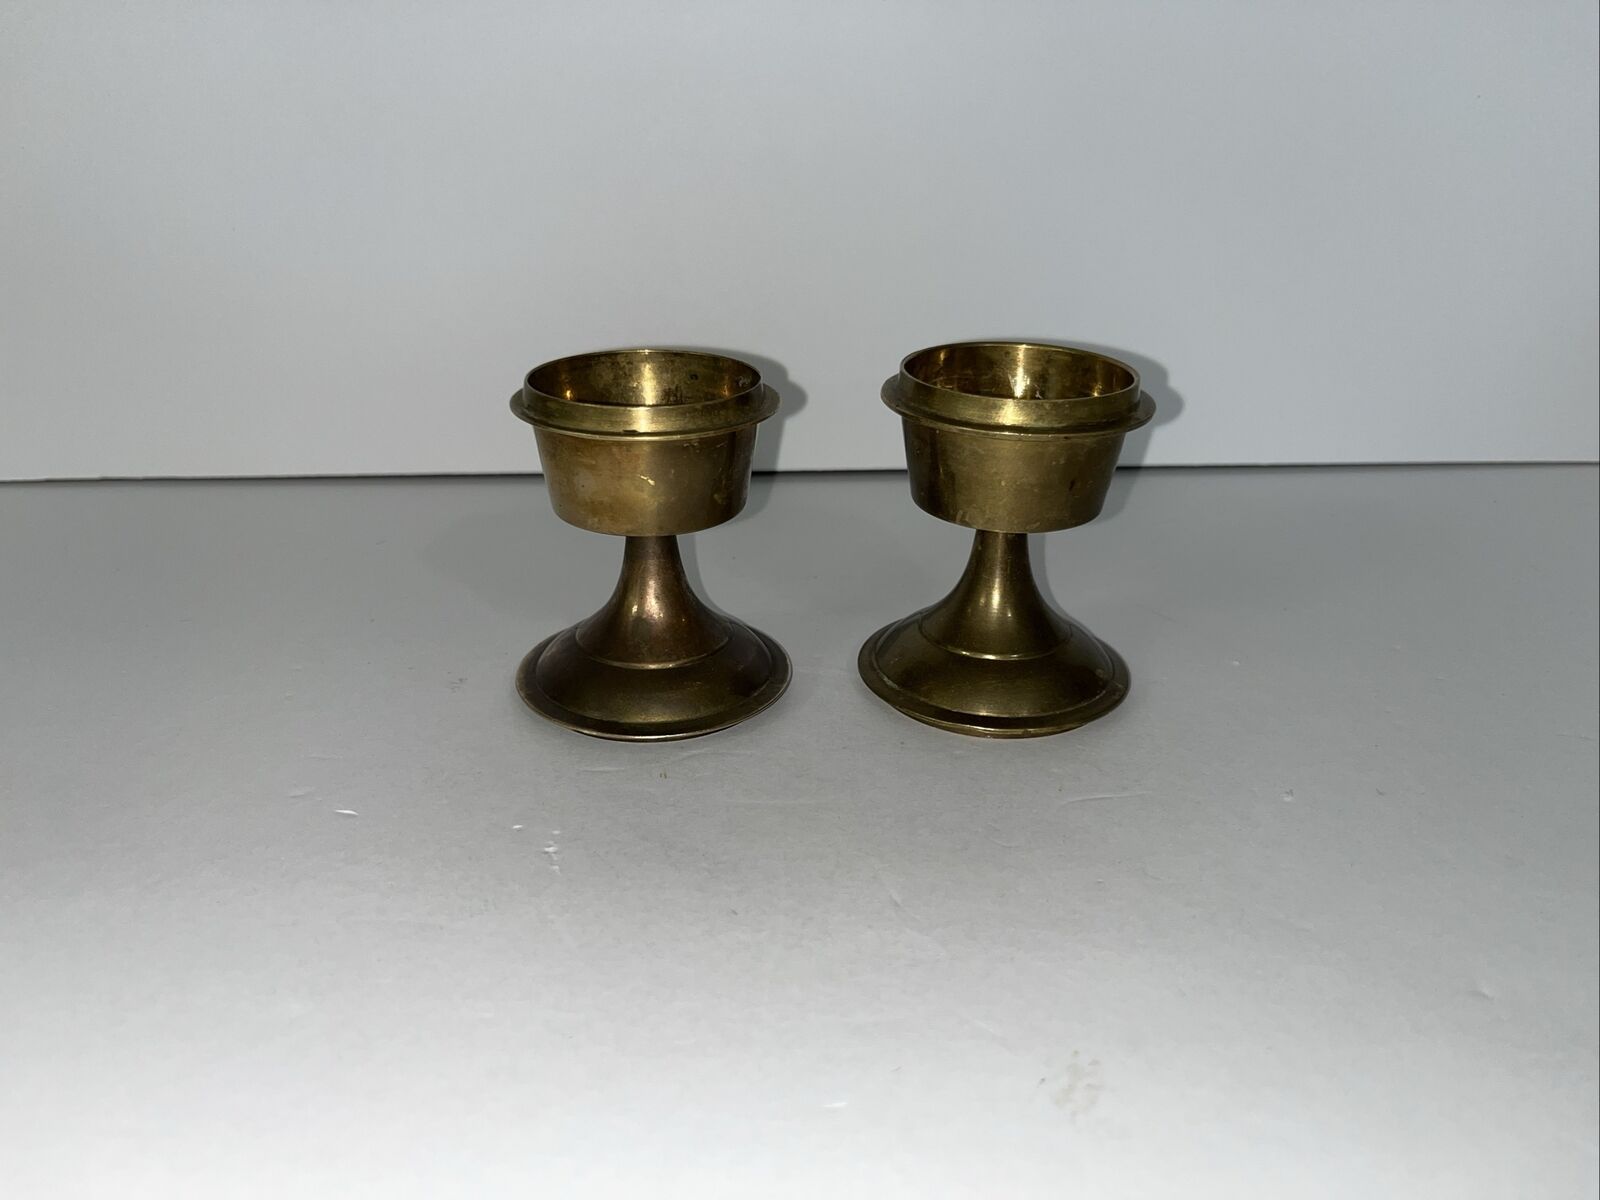 Vintage Solid Brass Candleholders Made in India